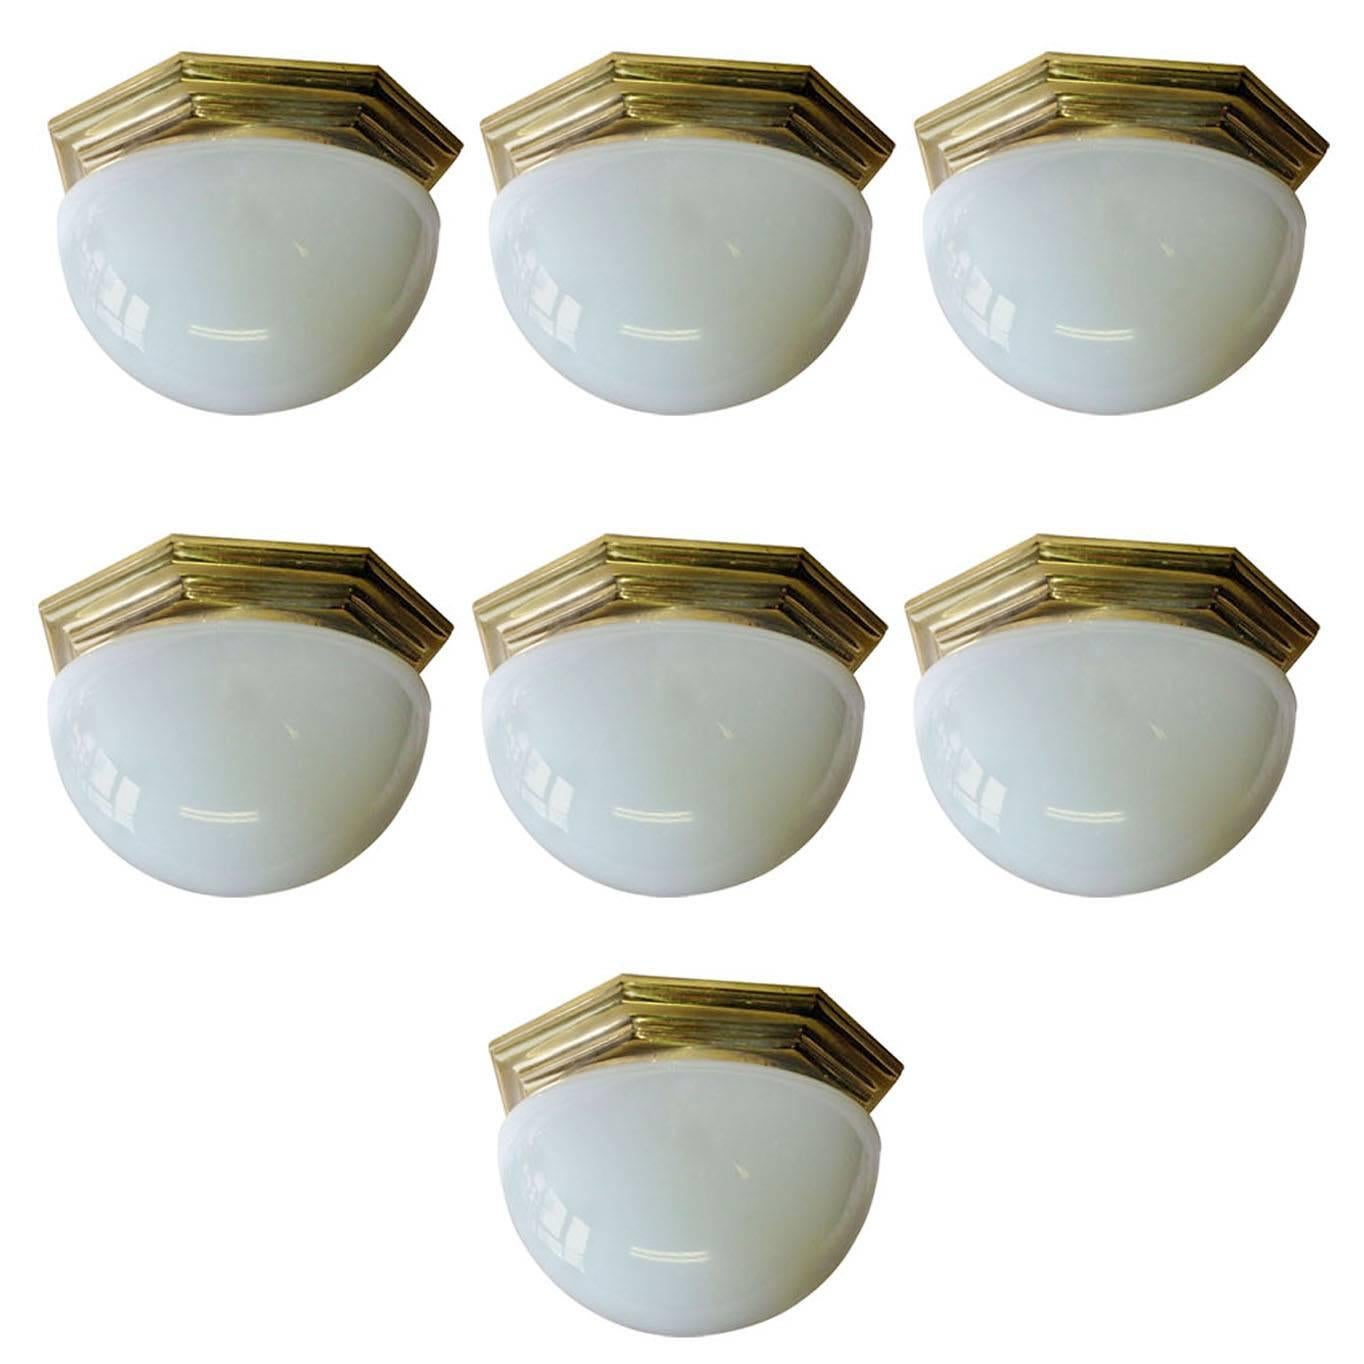 A set of seven French circa 1940's octagonal gilt bronze and milk glass flush mounted light fixtures with interior light. Sold individually.

Measurements:
Diameter: 12